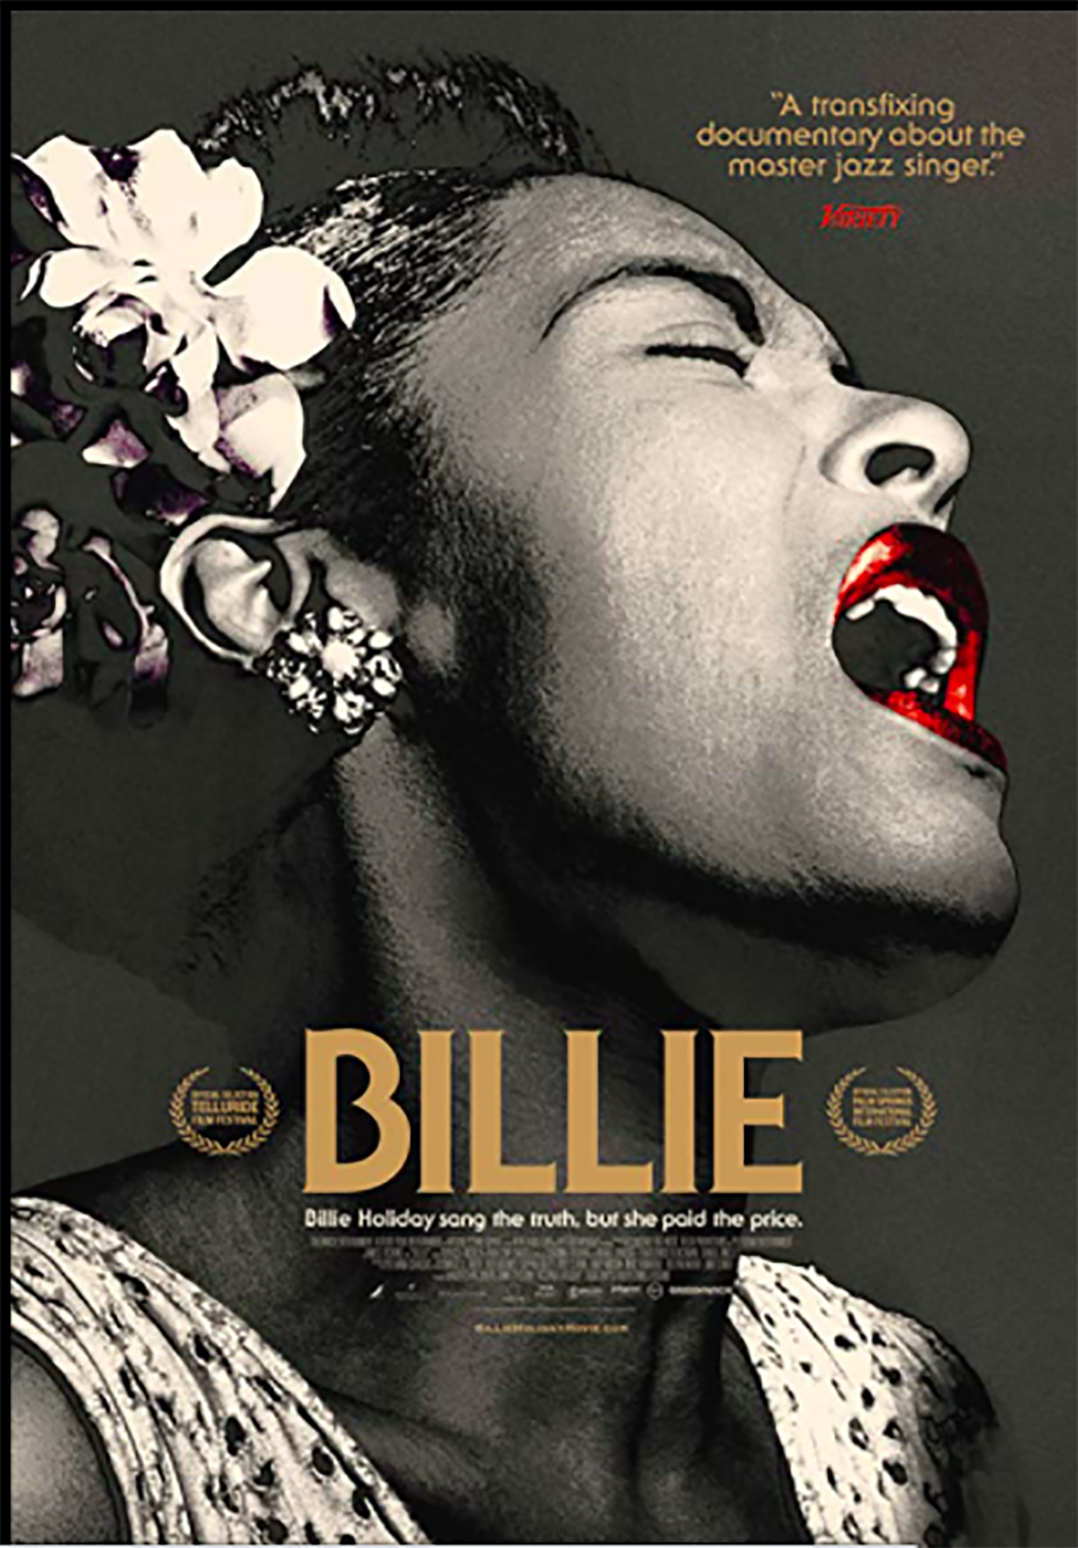 ‘Billie’ intrigues but doesn’t satisfy